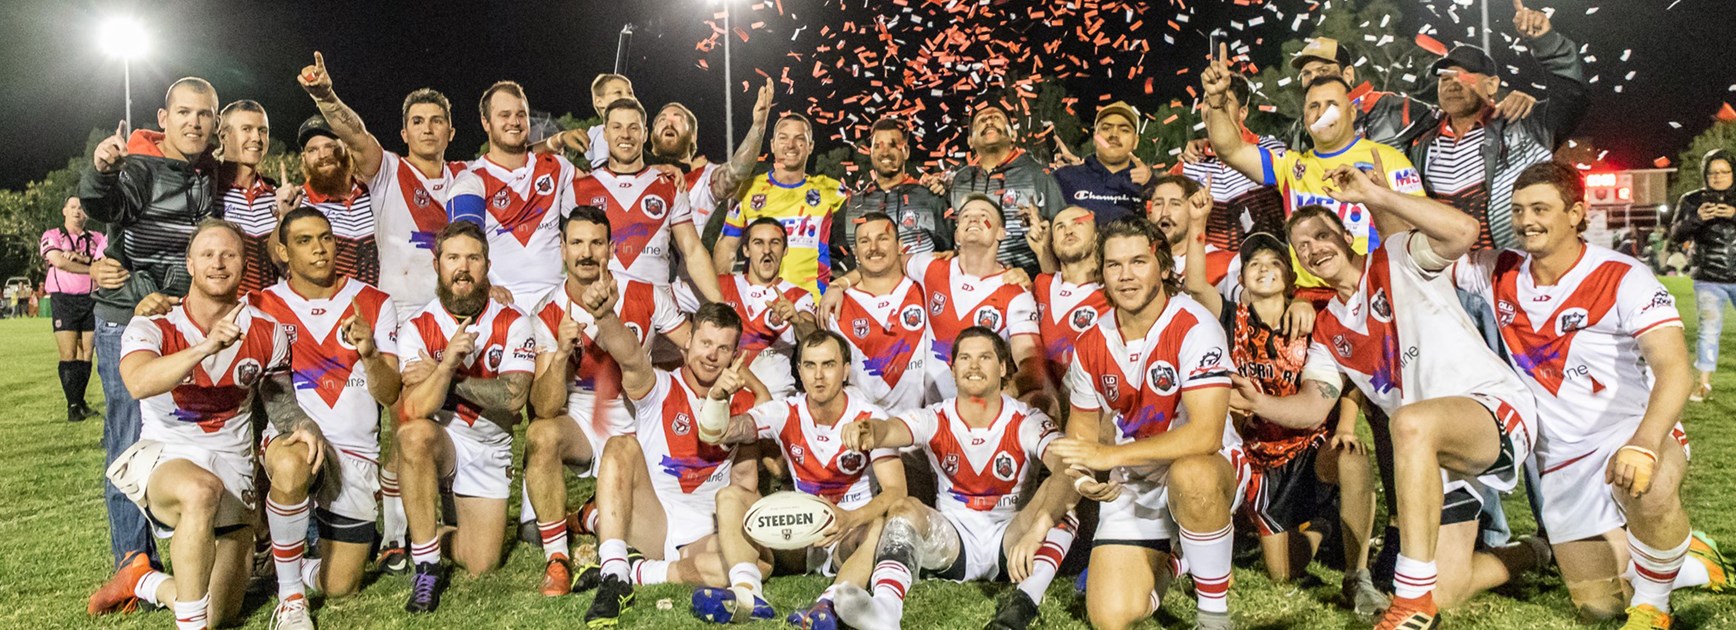 Central Highlands release 2020 season draw